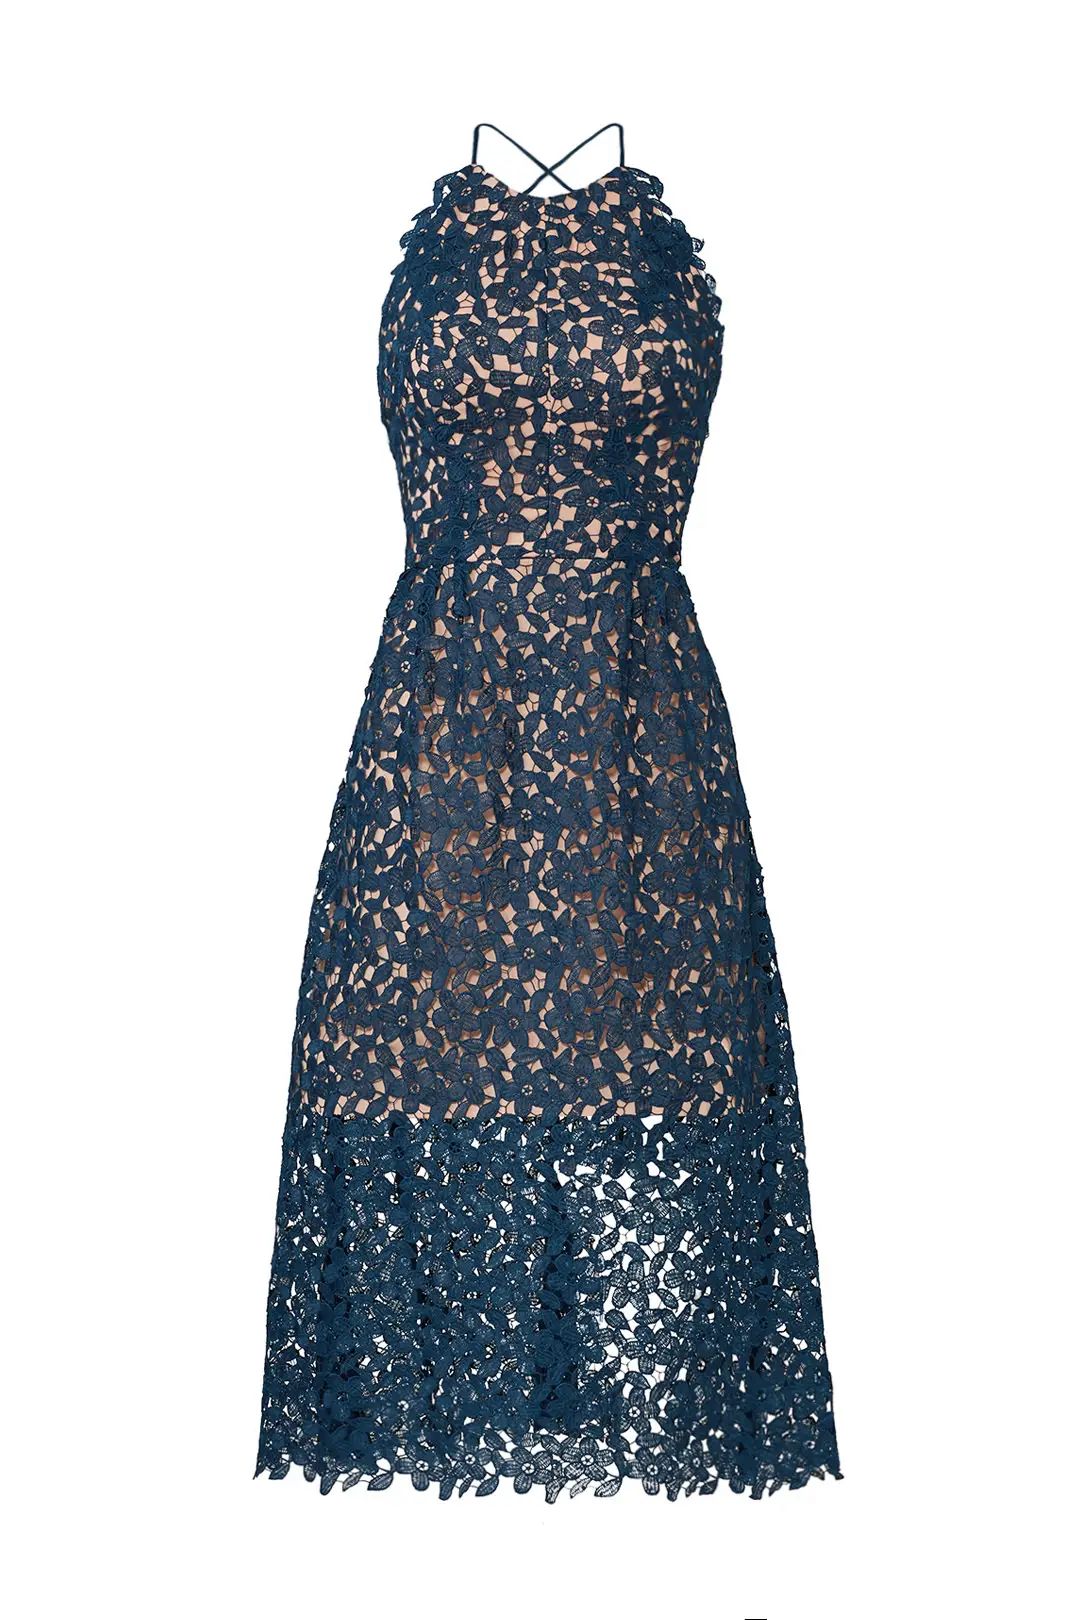 Slate & Willow Blue Opal Lace Dress | Rent the Runway